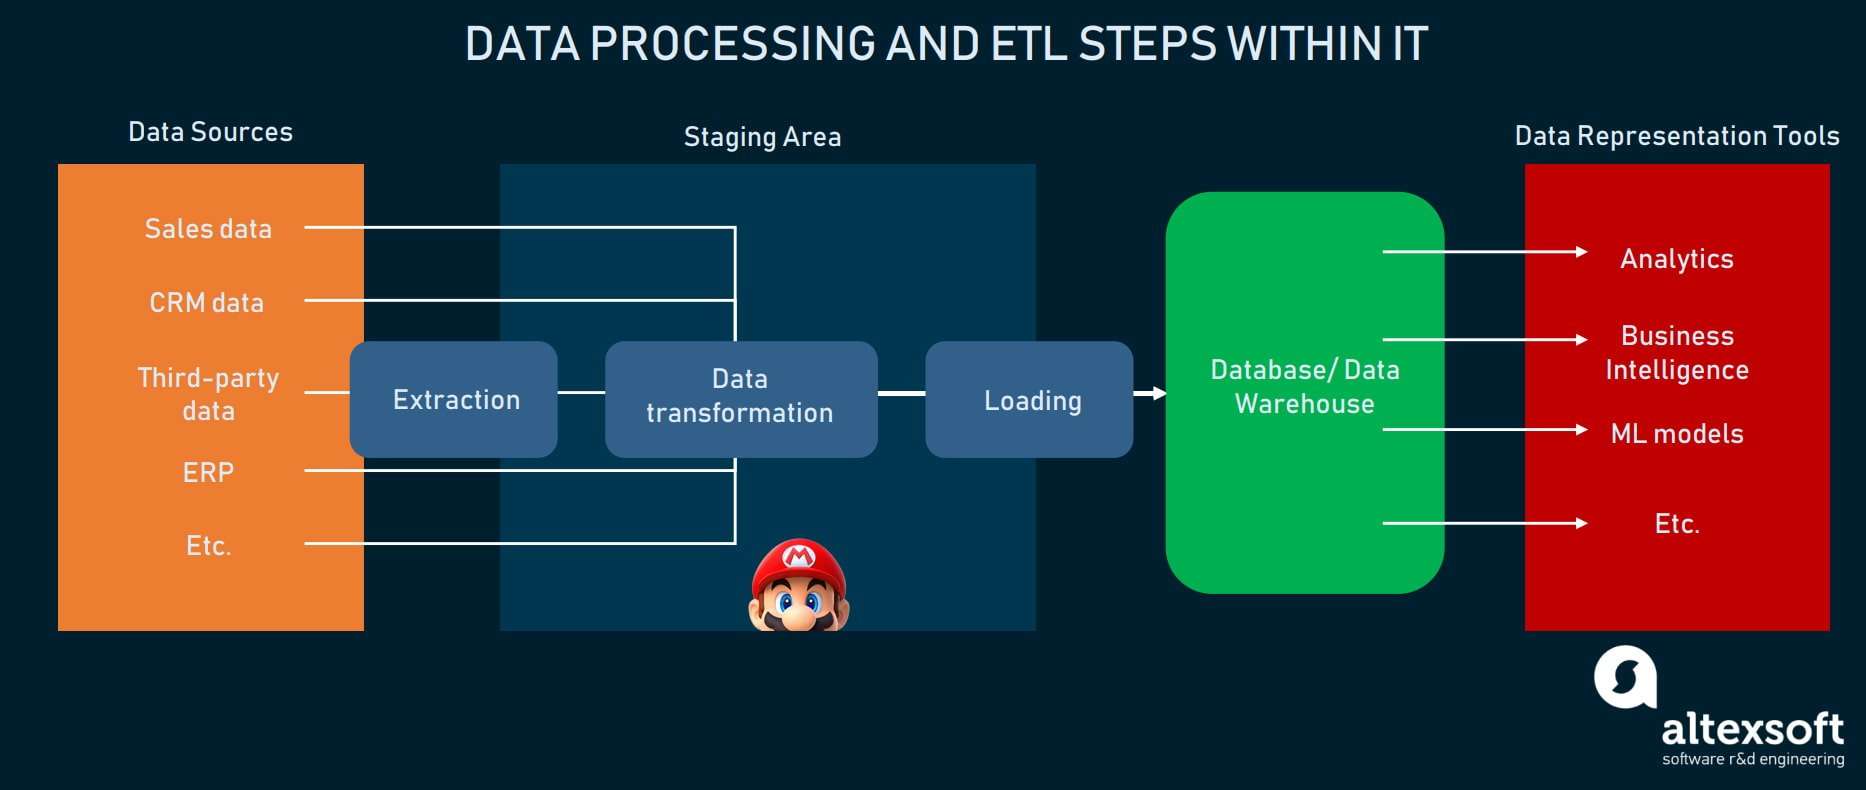 Data processing and ETL steps within it scheme